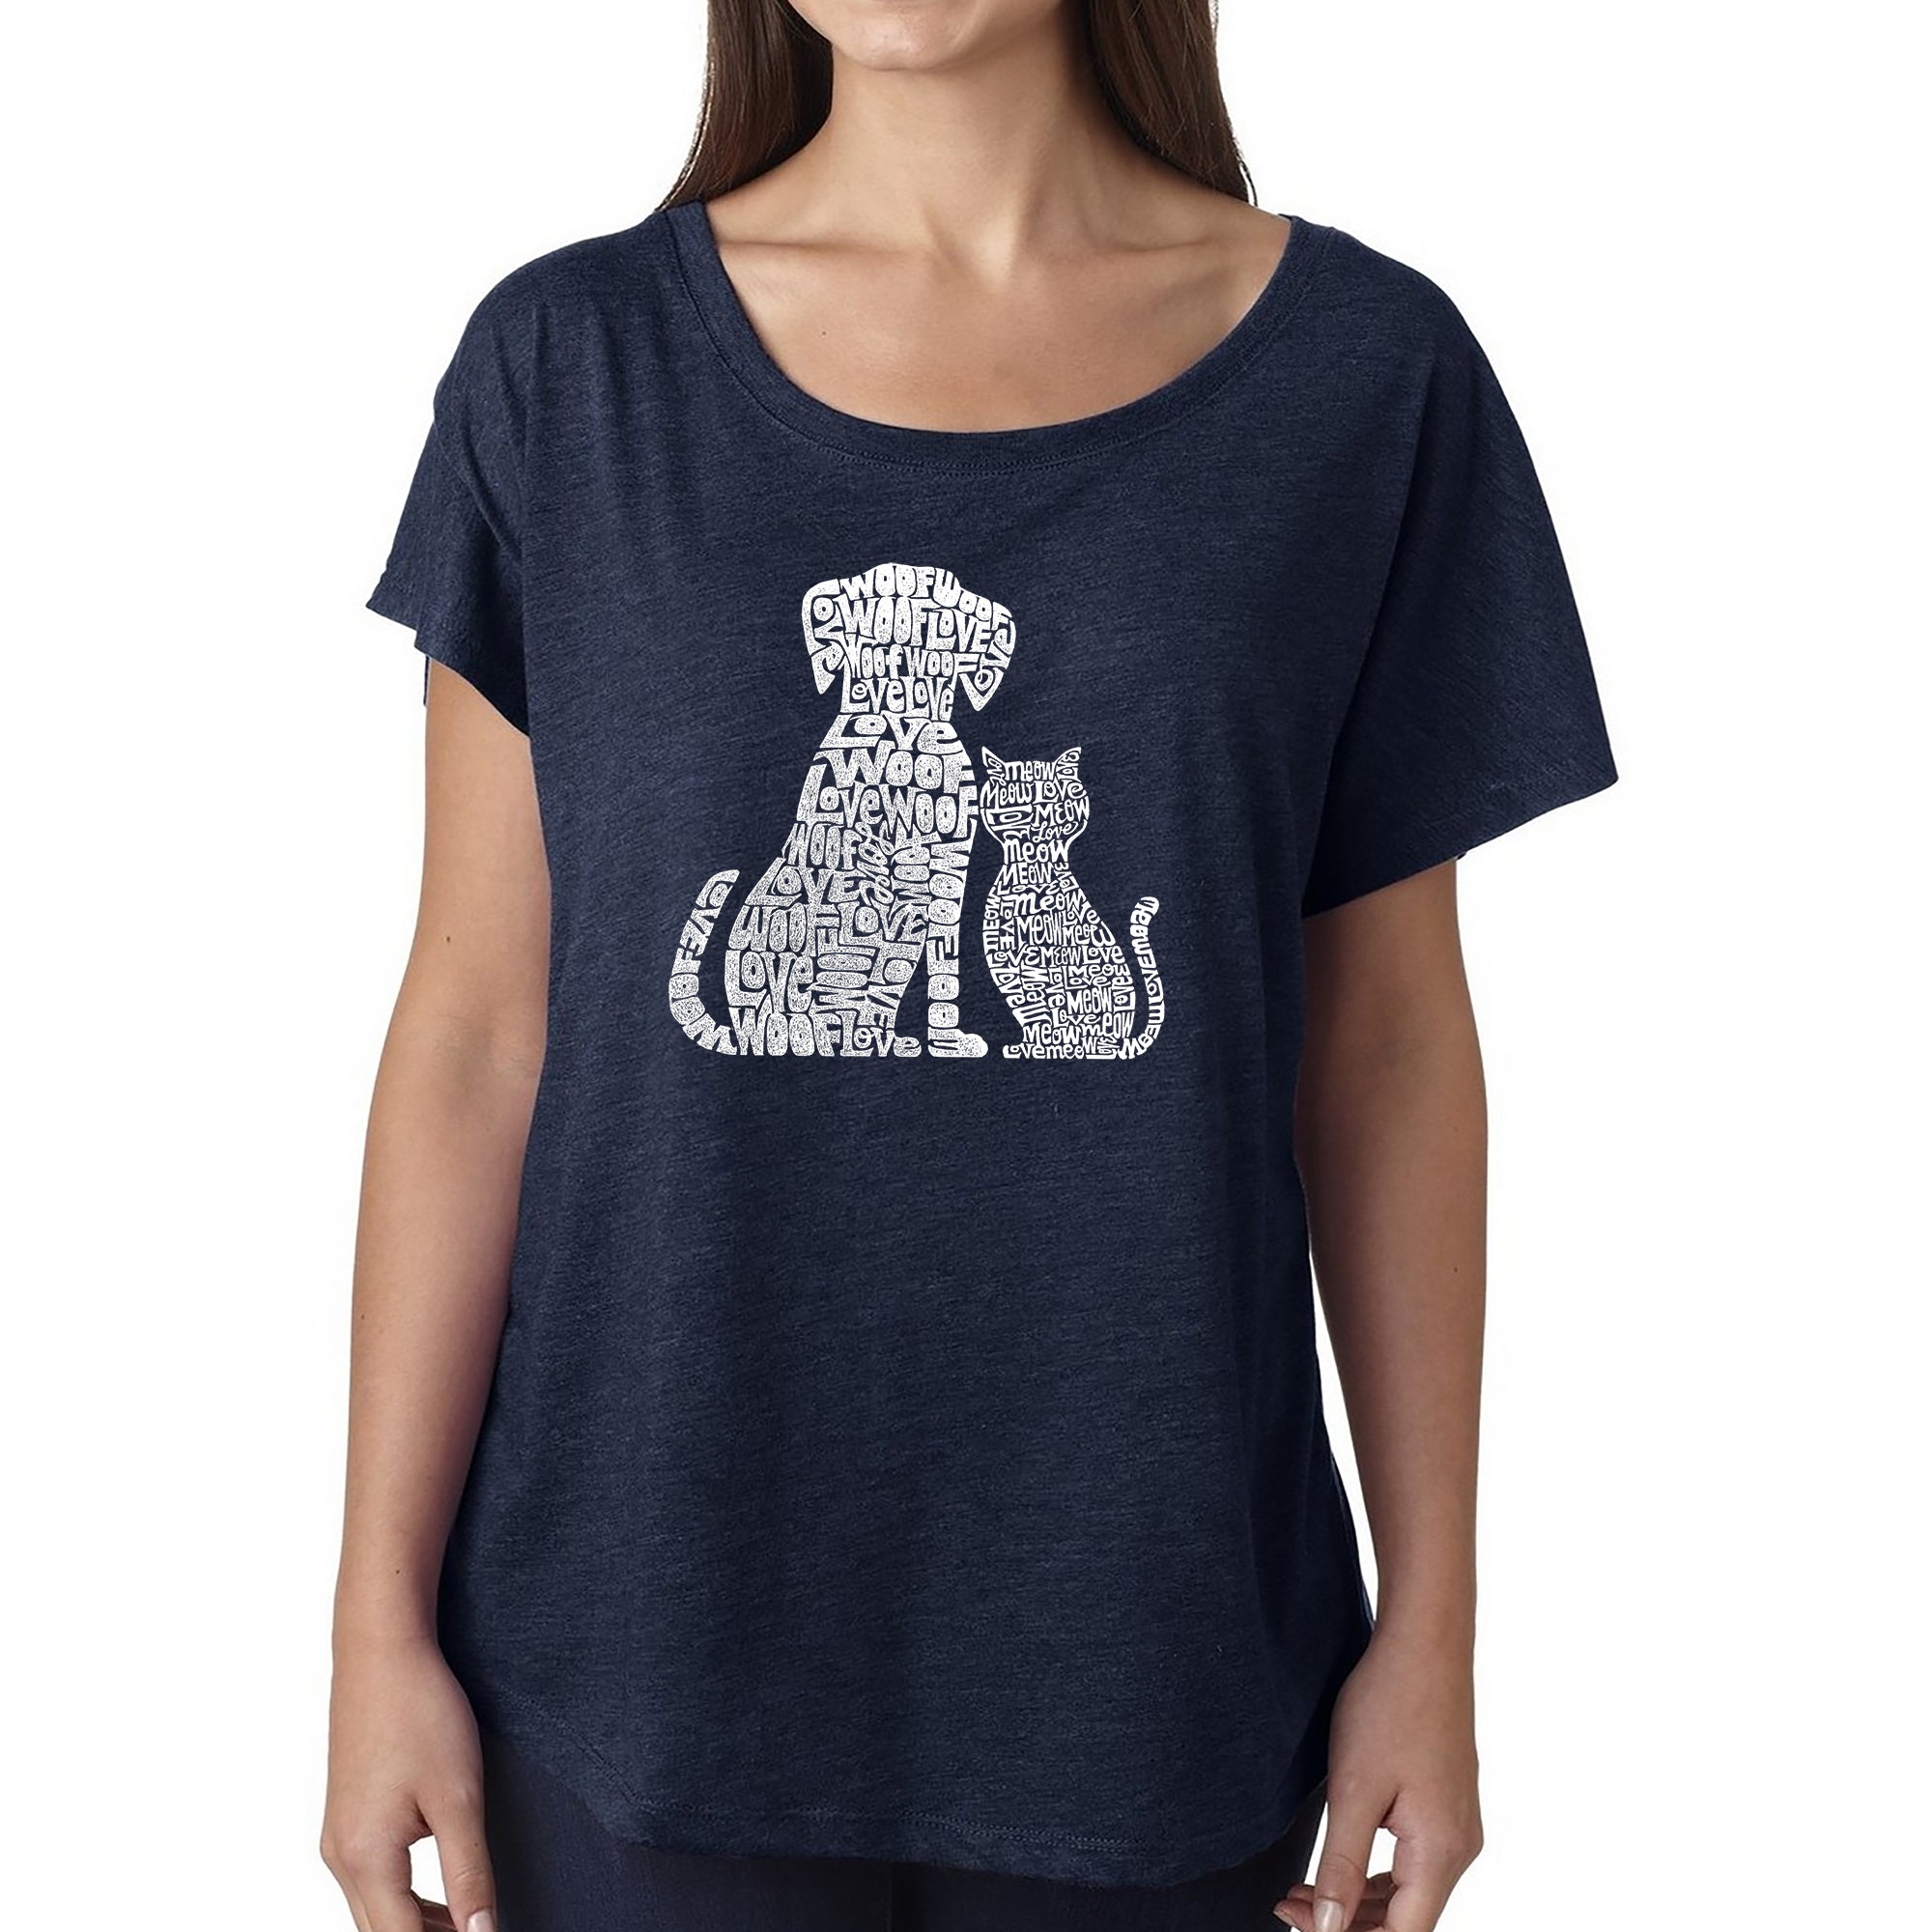 Dogs And Cats - Women's Loose Fit Dolman Cut Word Art Shirt - Navy - Large